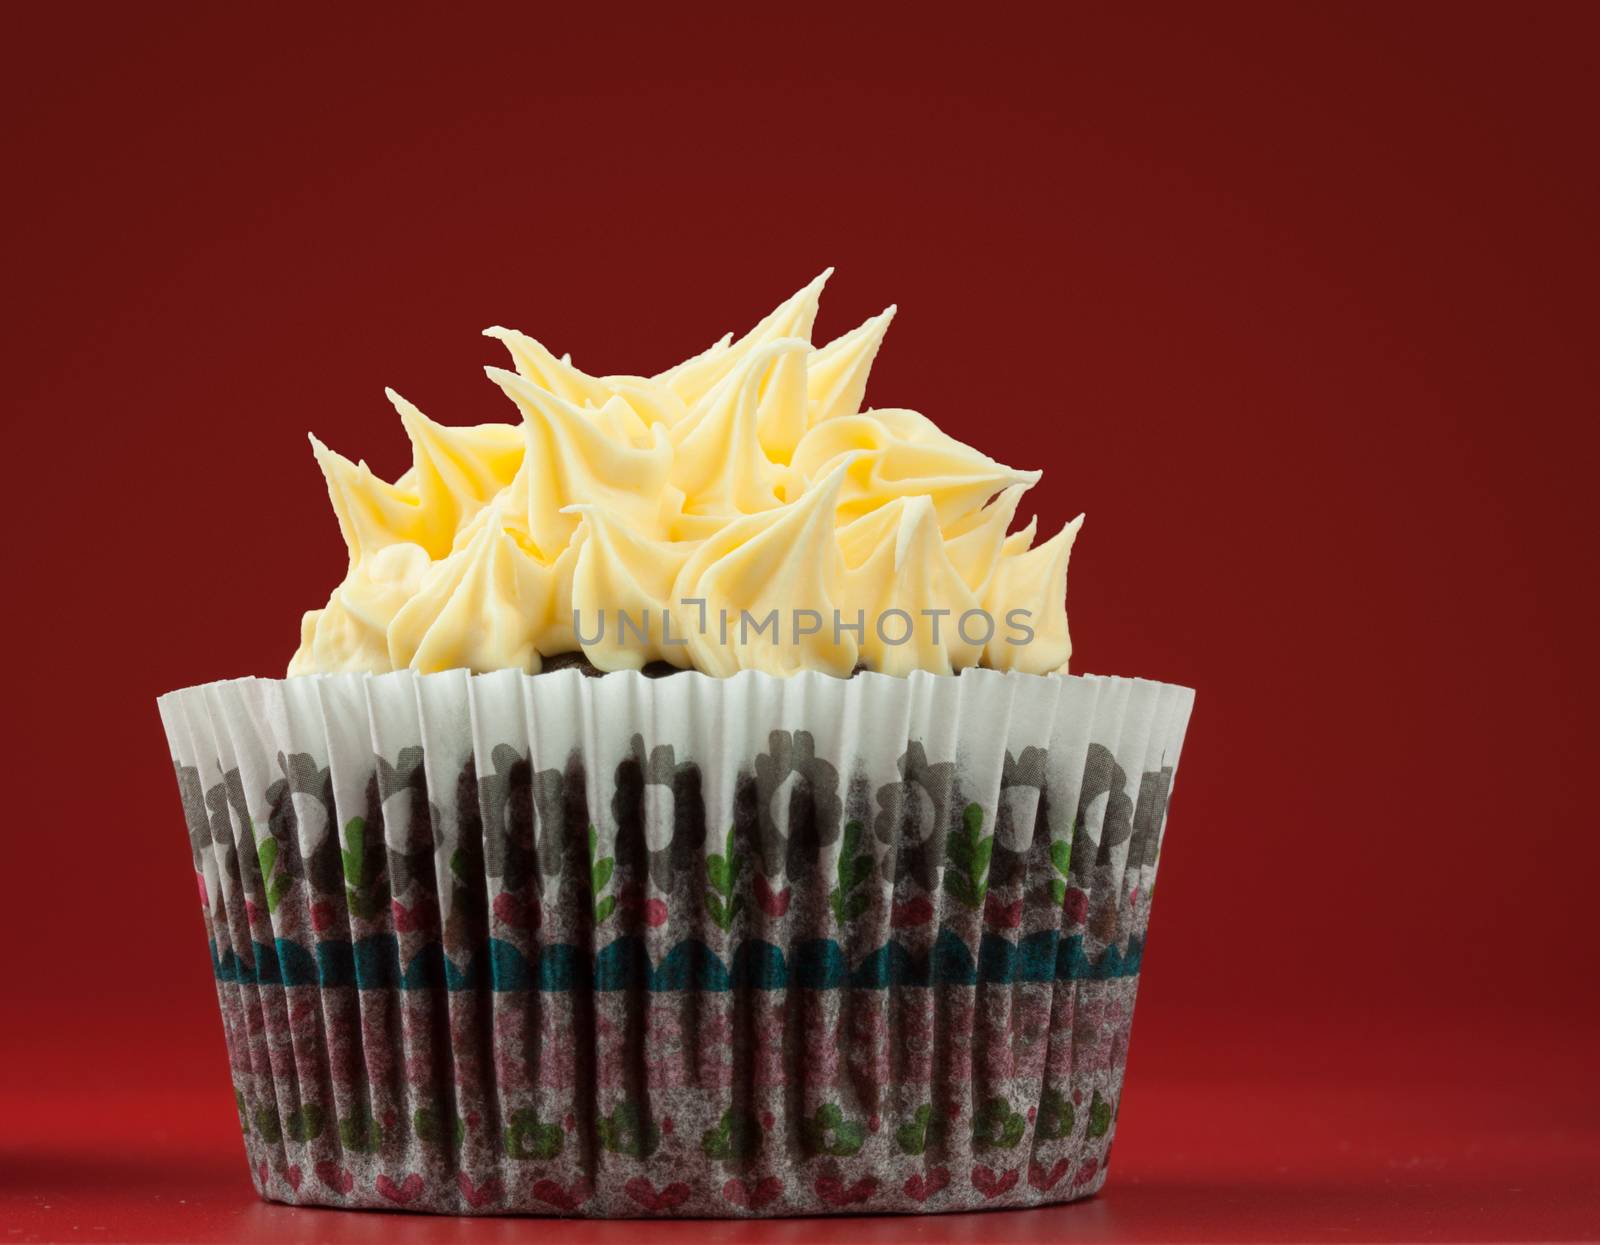 Chocolate cupcake with vanilla spikes icing, red background